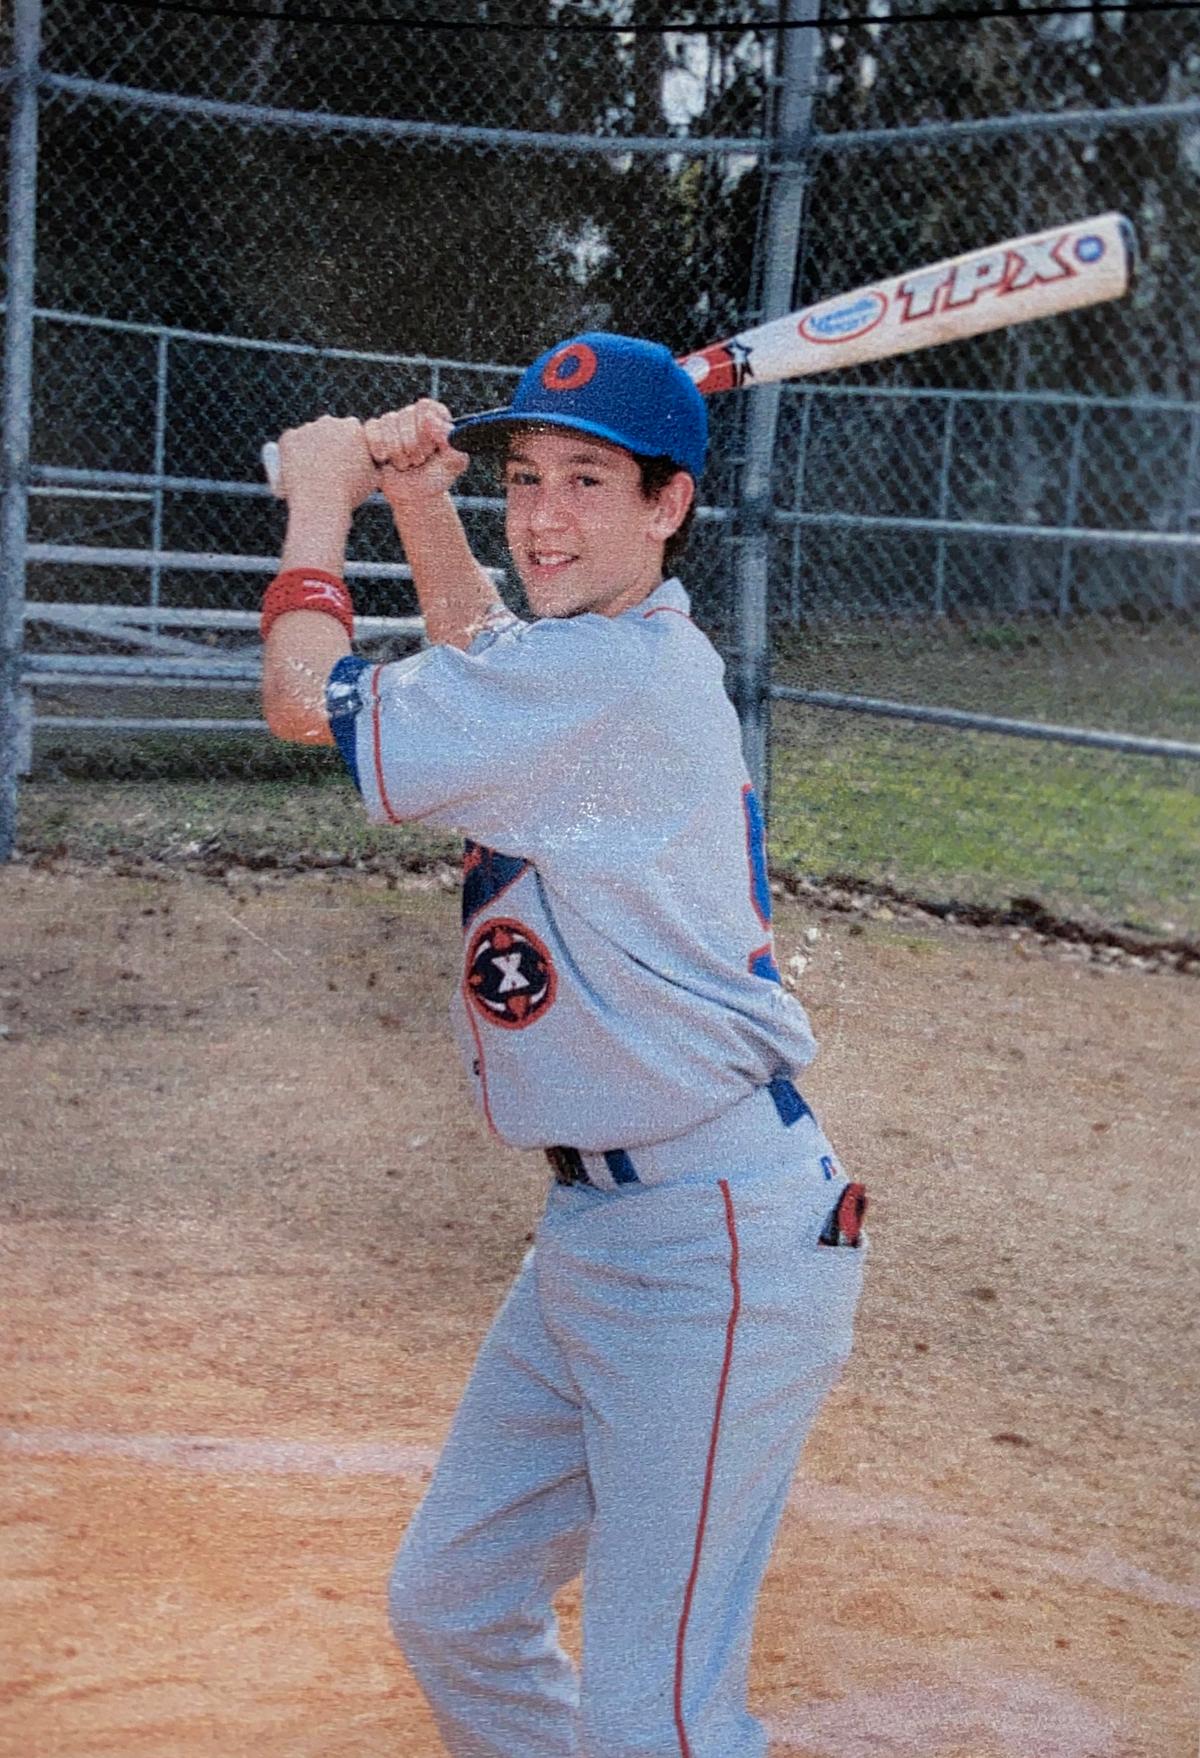 Griffin playing baseball during his middle school years. (Courtesy of <a href="https://www.instagram.com/griffin.furlong/">Griffin Furlong</a>)